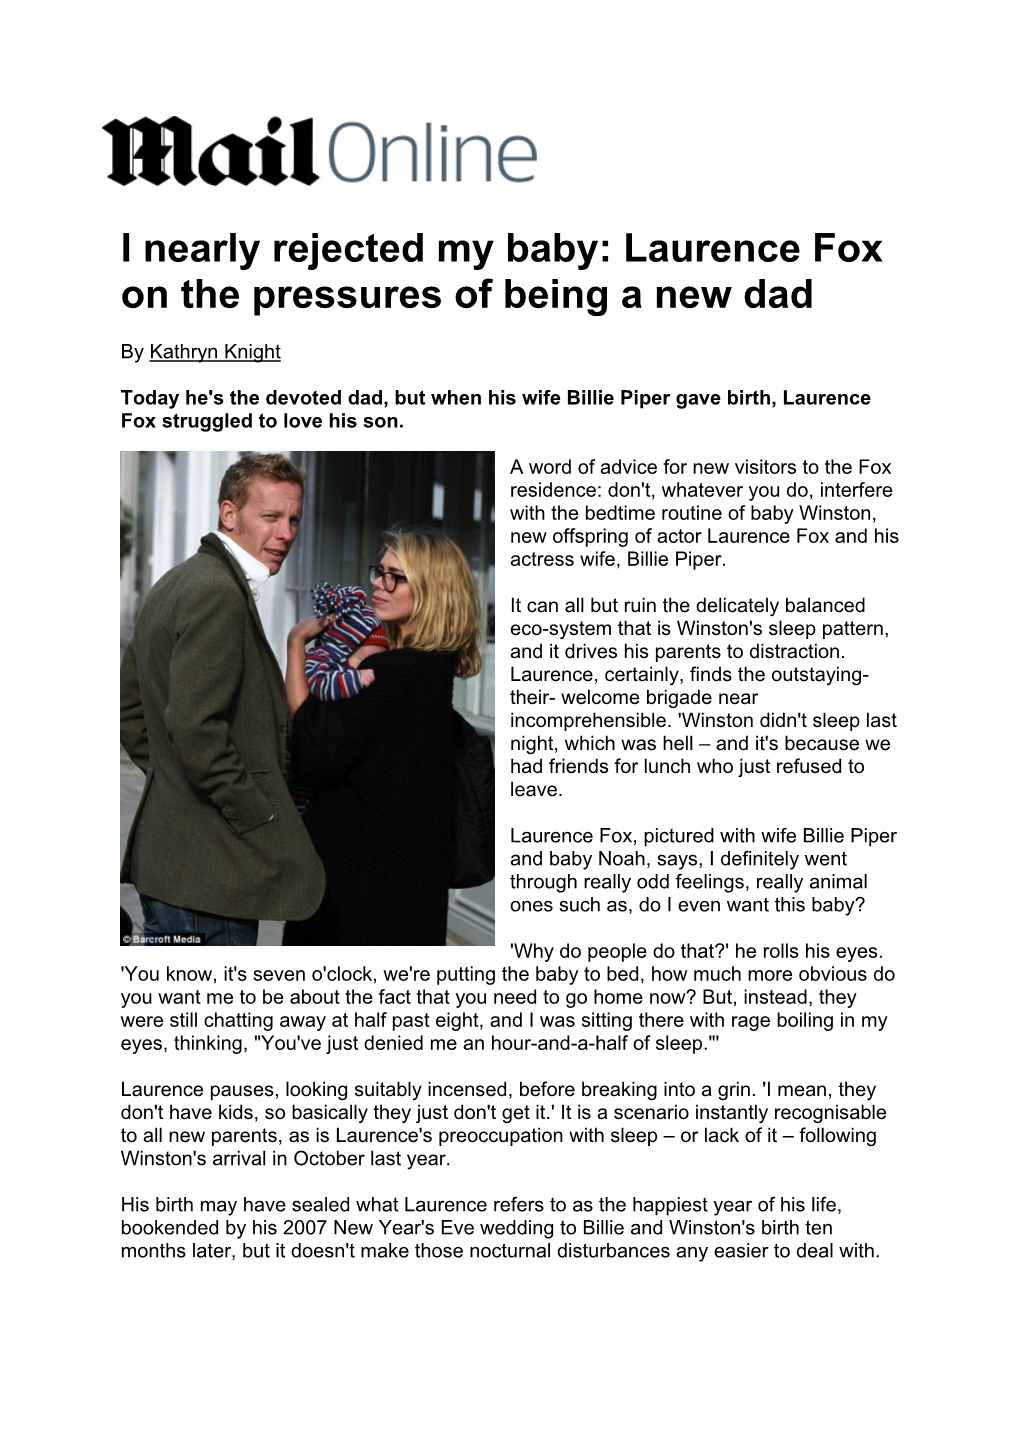 I Nearly Rejected My Baby: Laurence Fox on the Pressures of Being a New Dad